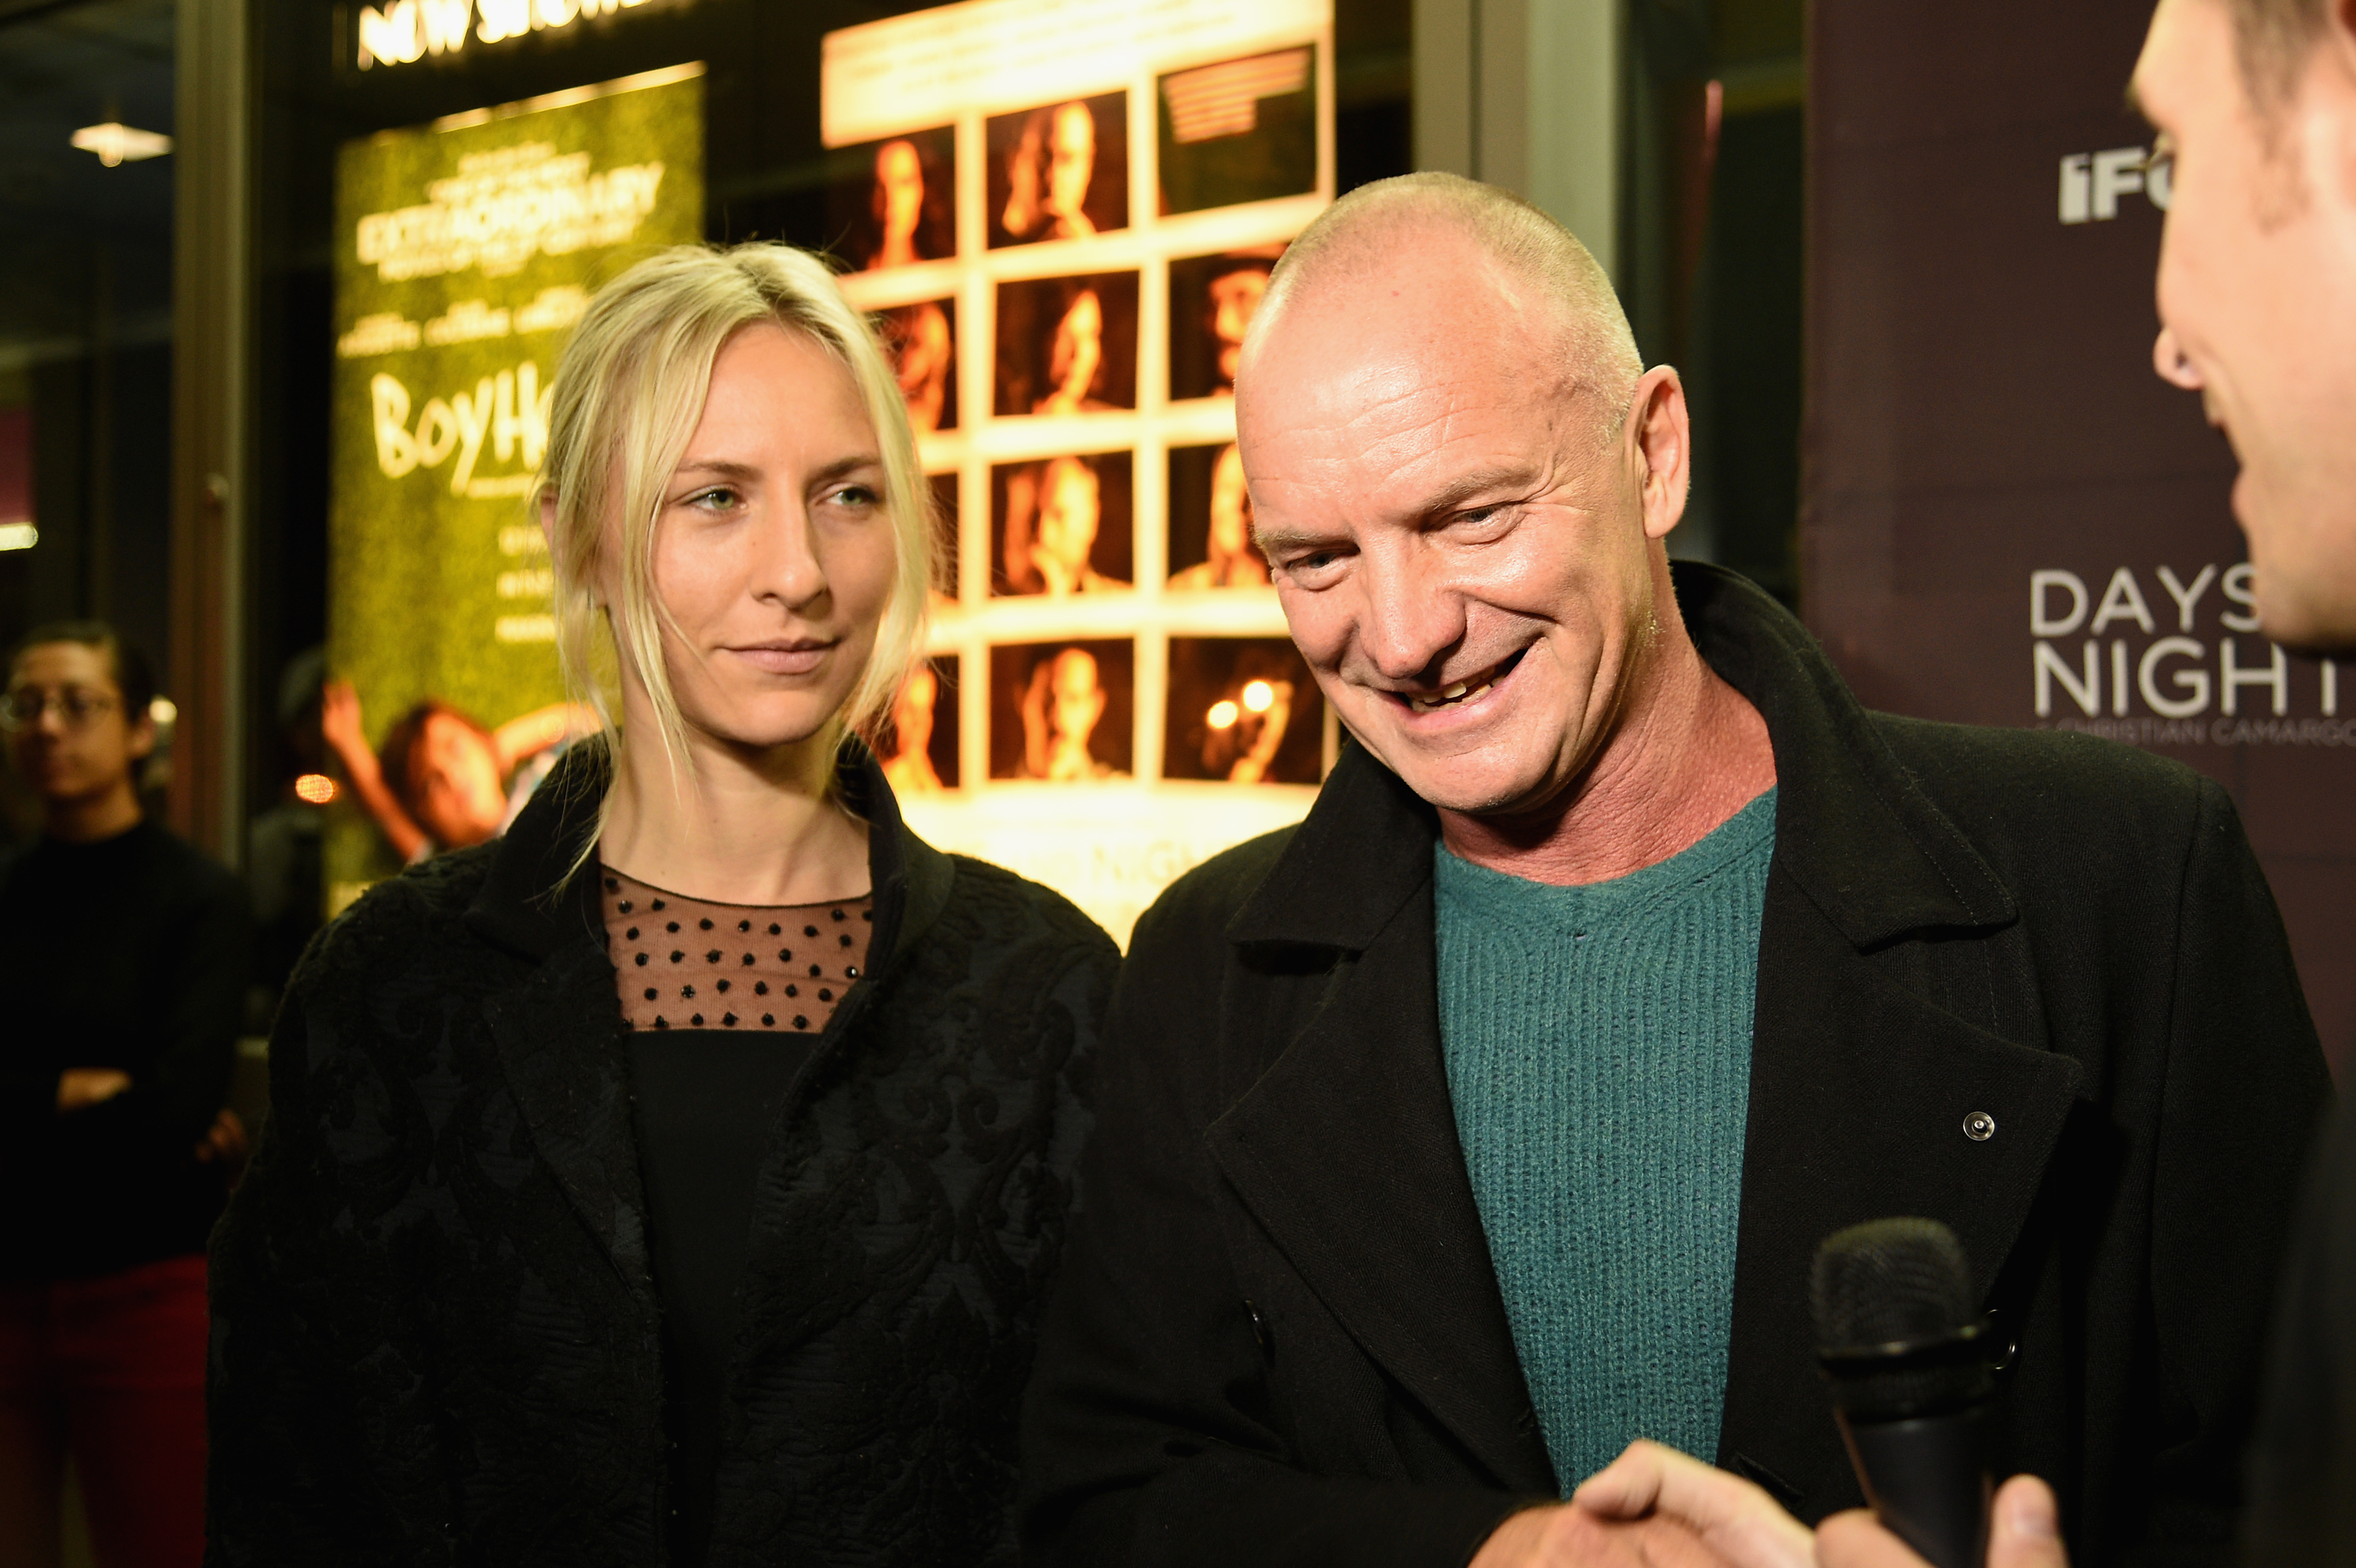 Mickey Sumner and Sting attend the premiere of "Days And Nights" at the IFC Center in New York City on September 25, 2014. | Source: Getty Images